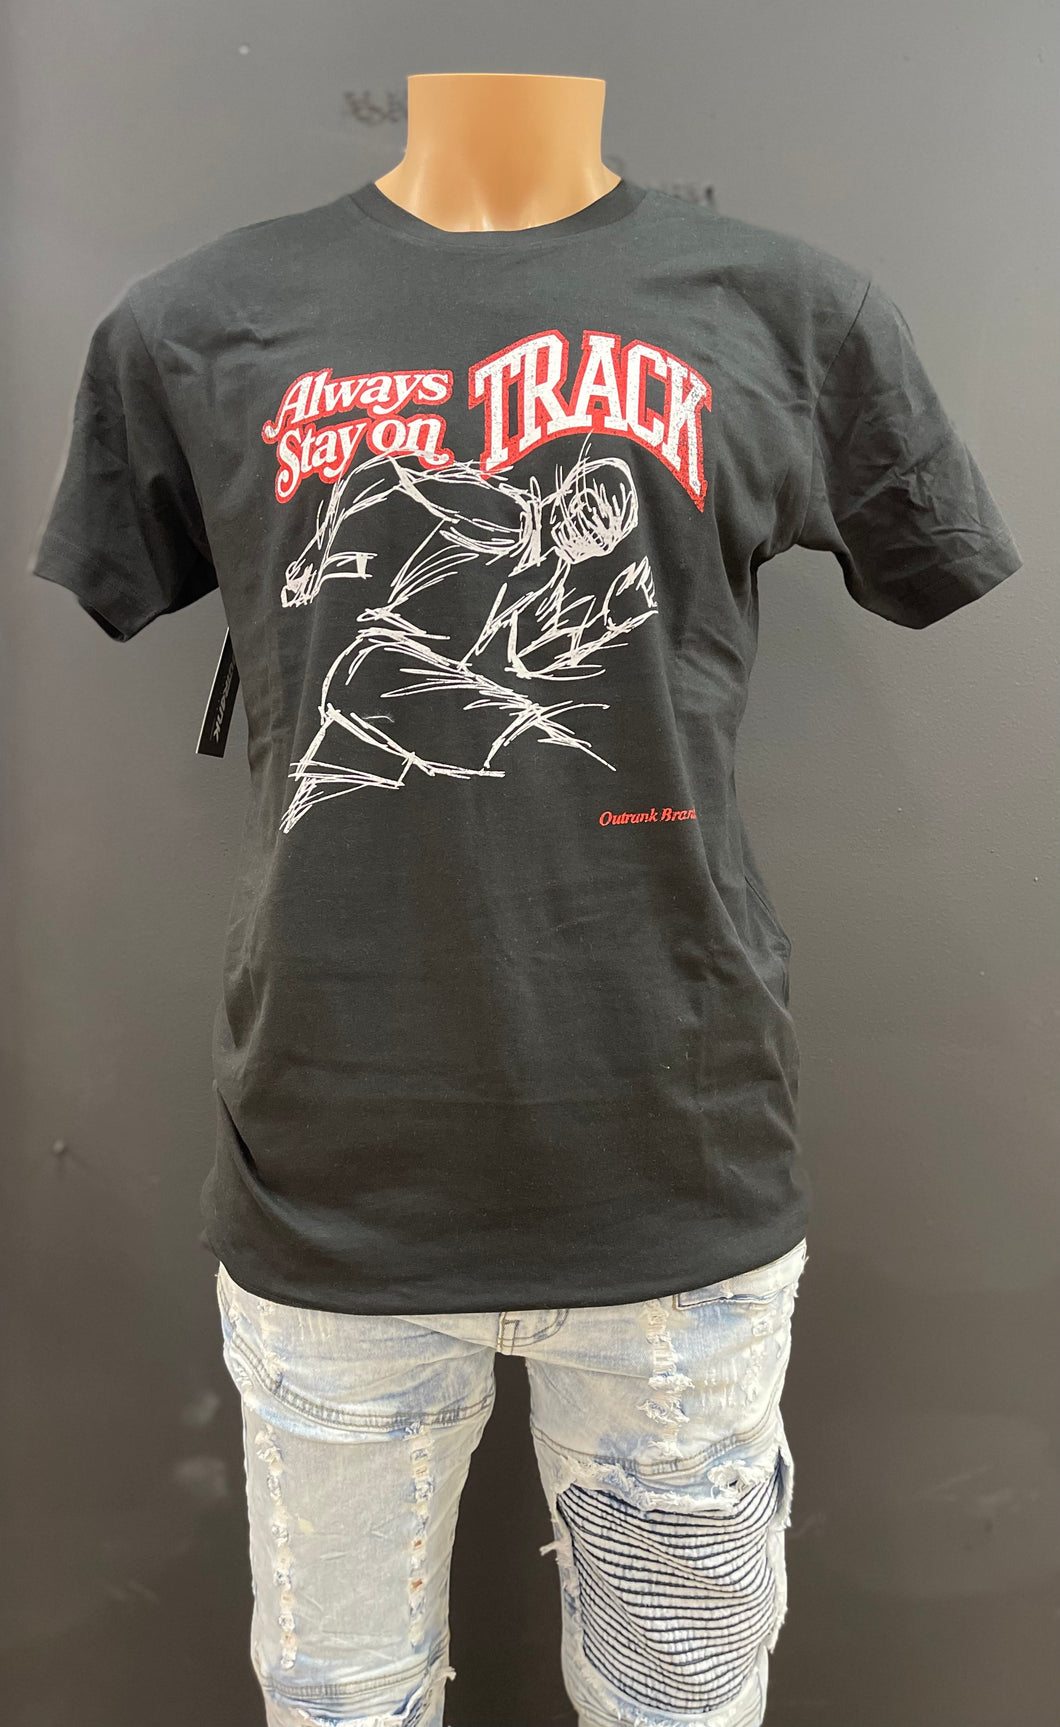 Always stay on track shirt